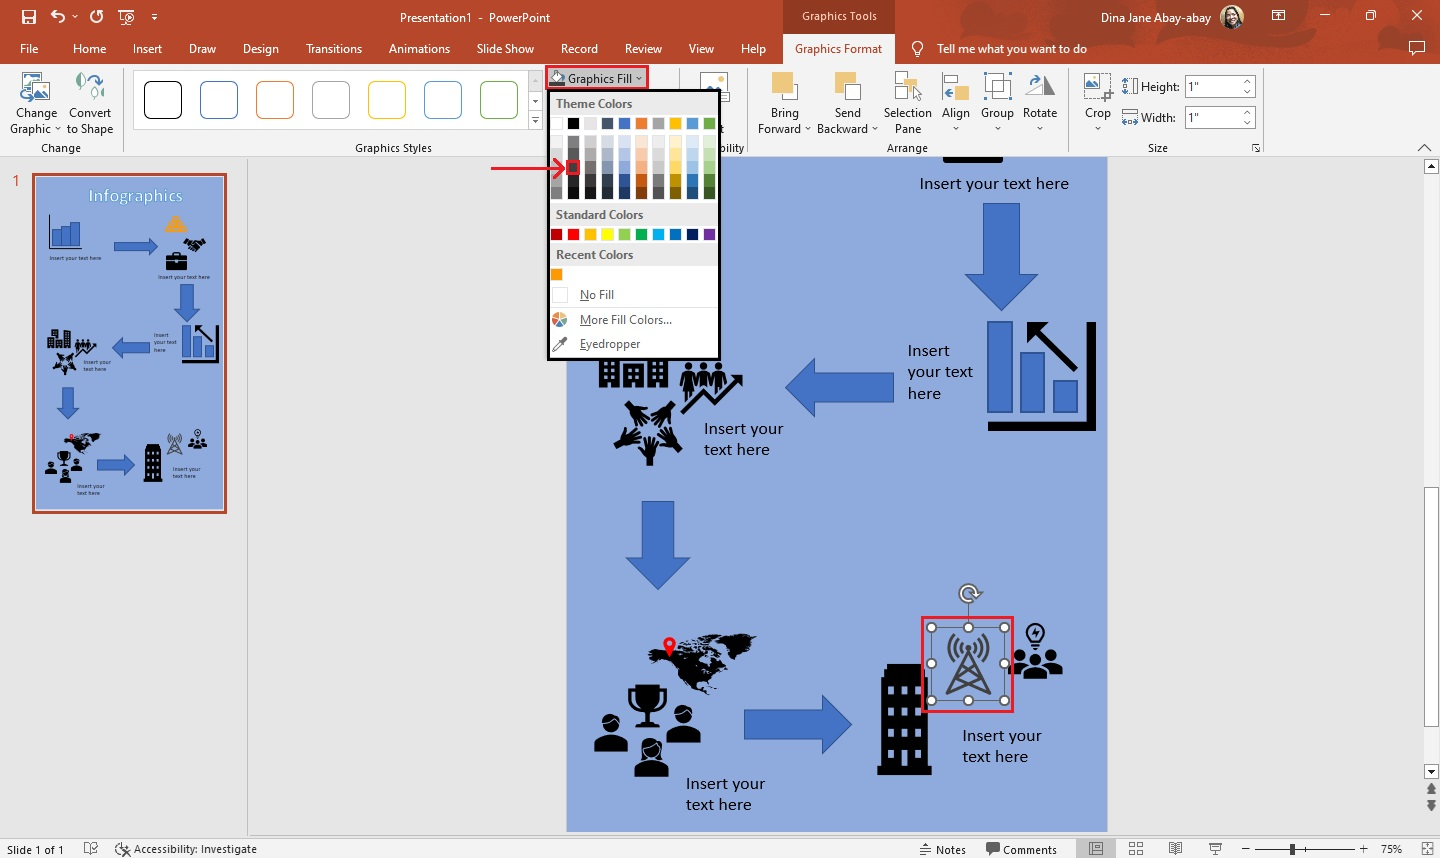 Select "Graphic Format" tab and click "graphic fill." Then select a desired color for your infographic in PowerPoint.